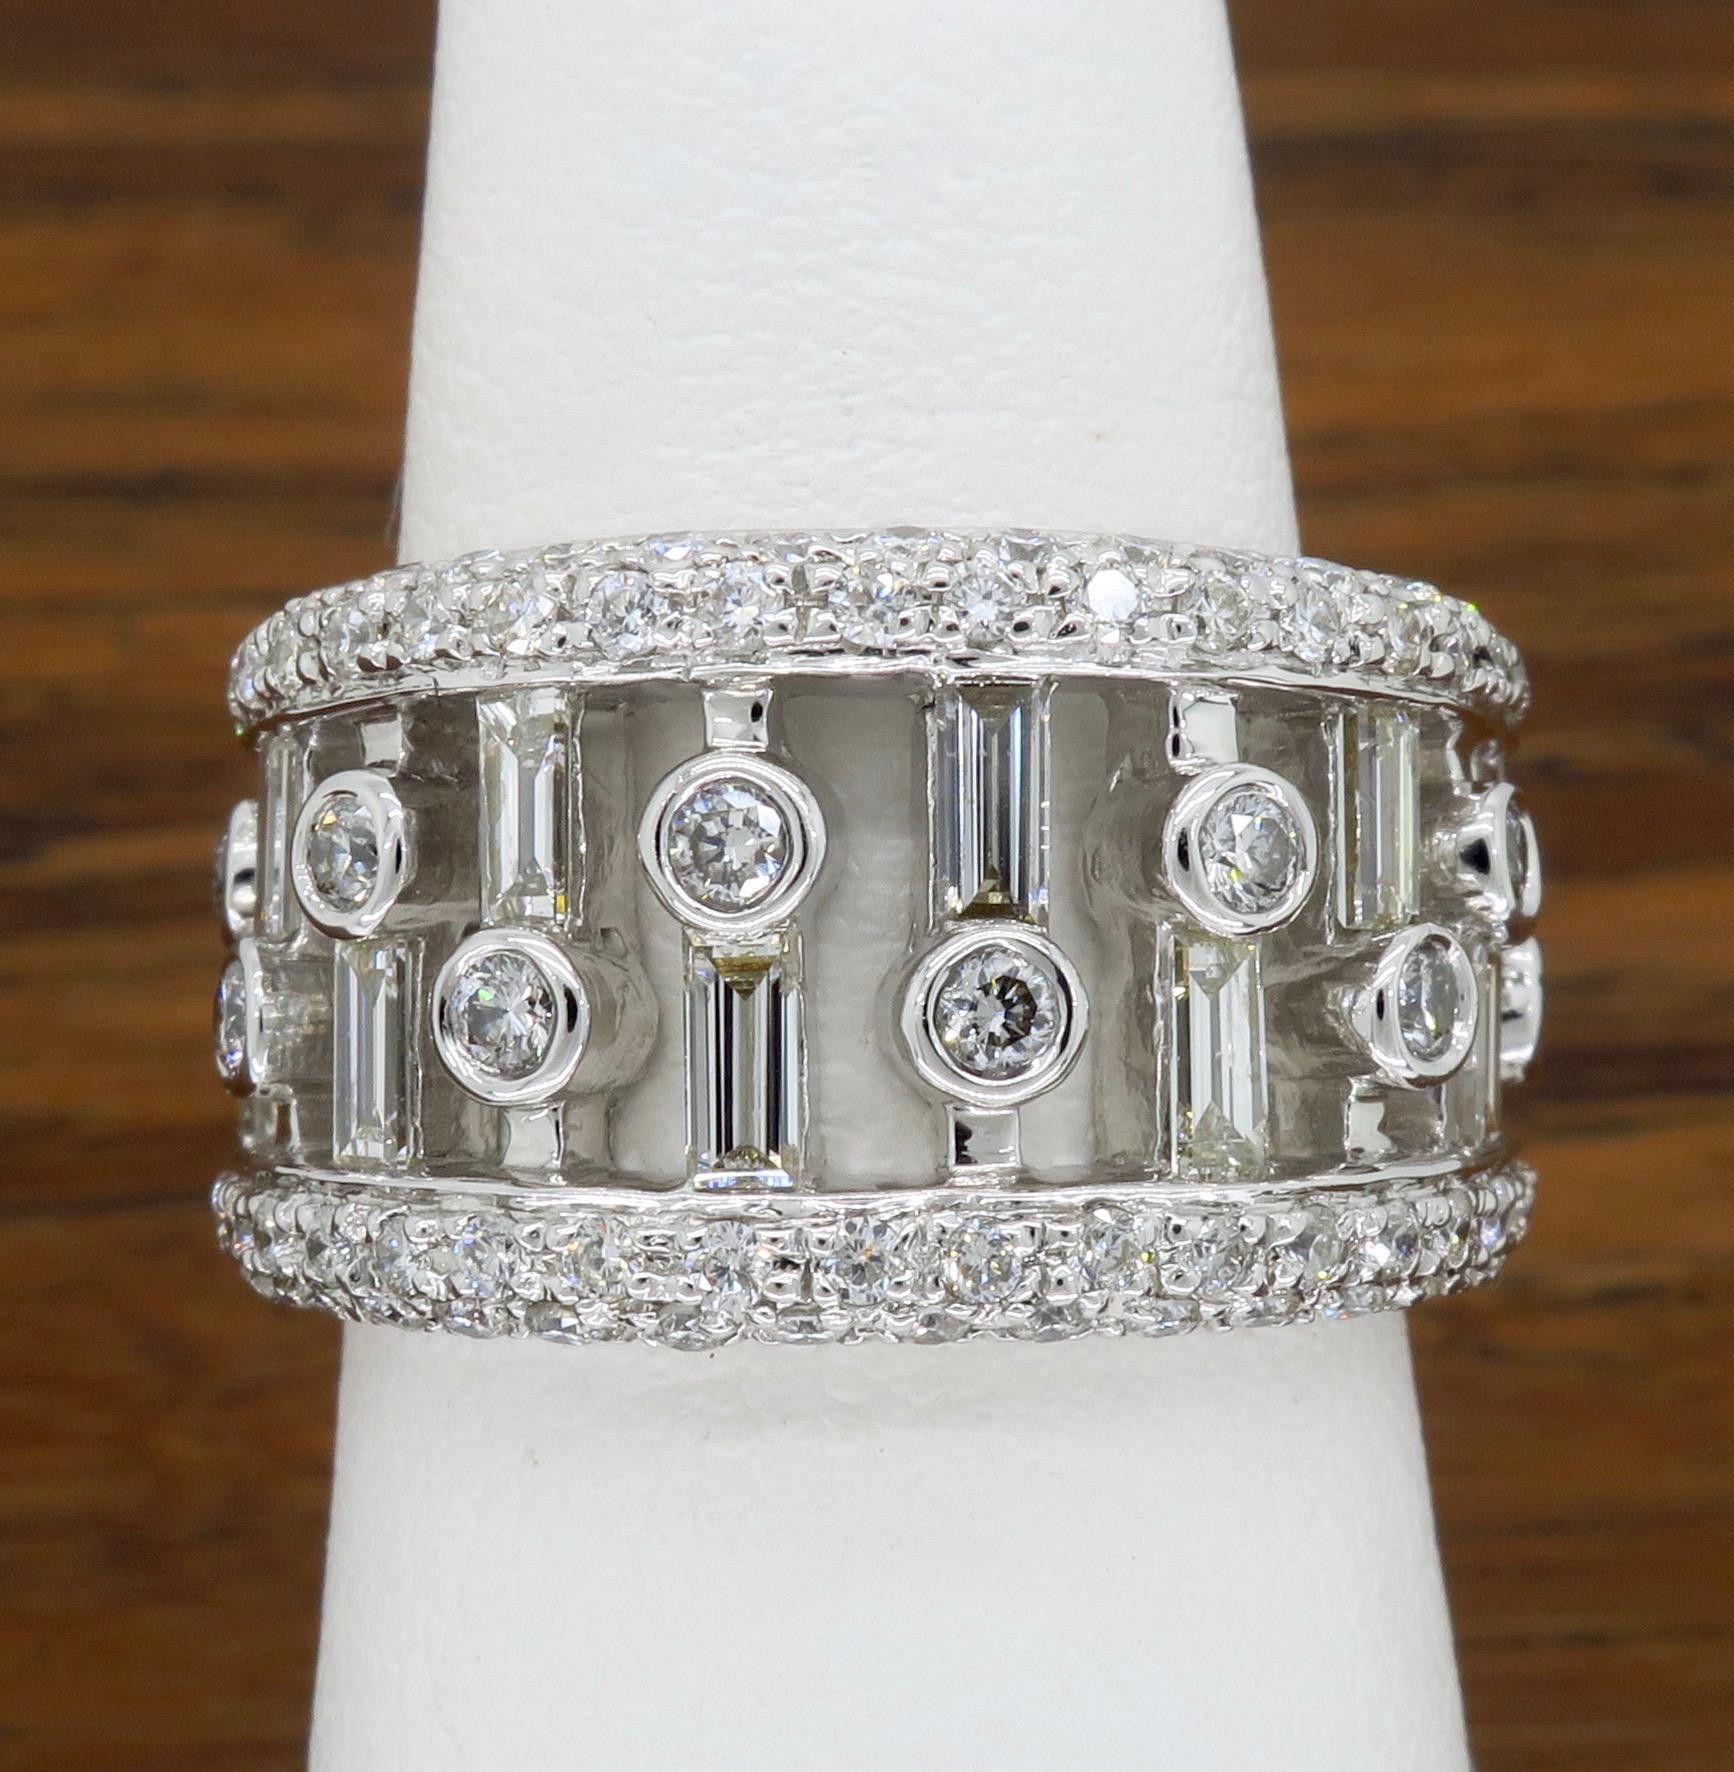 This unique negative space style diamond band features approximately 1.75ctw of Diamonds set in a stunning vertical row design.

Diamond Carat Weight: Approximately 1.75CTW
Diamond Cut: Baguette Cut and Round Brilliant Cut Diamonds
Color: Average